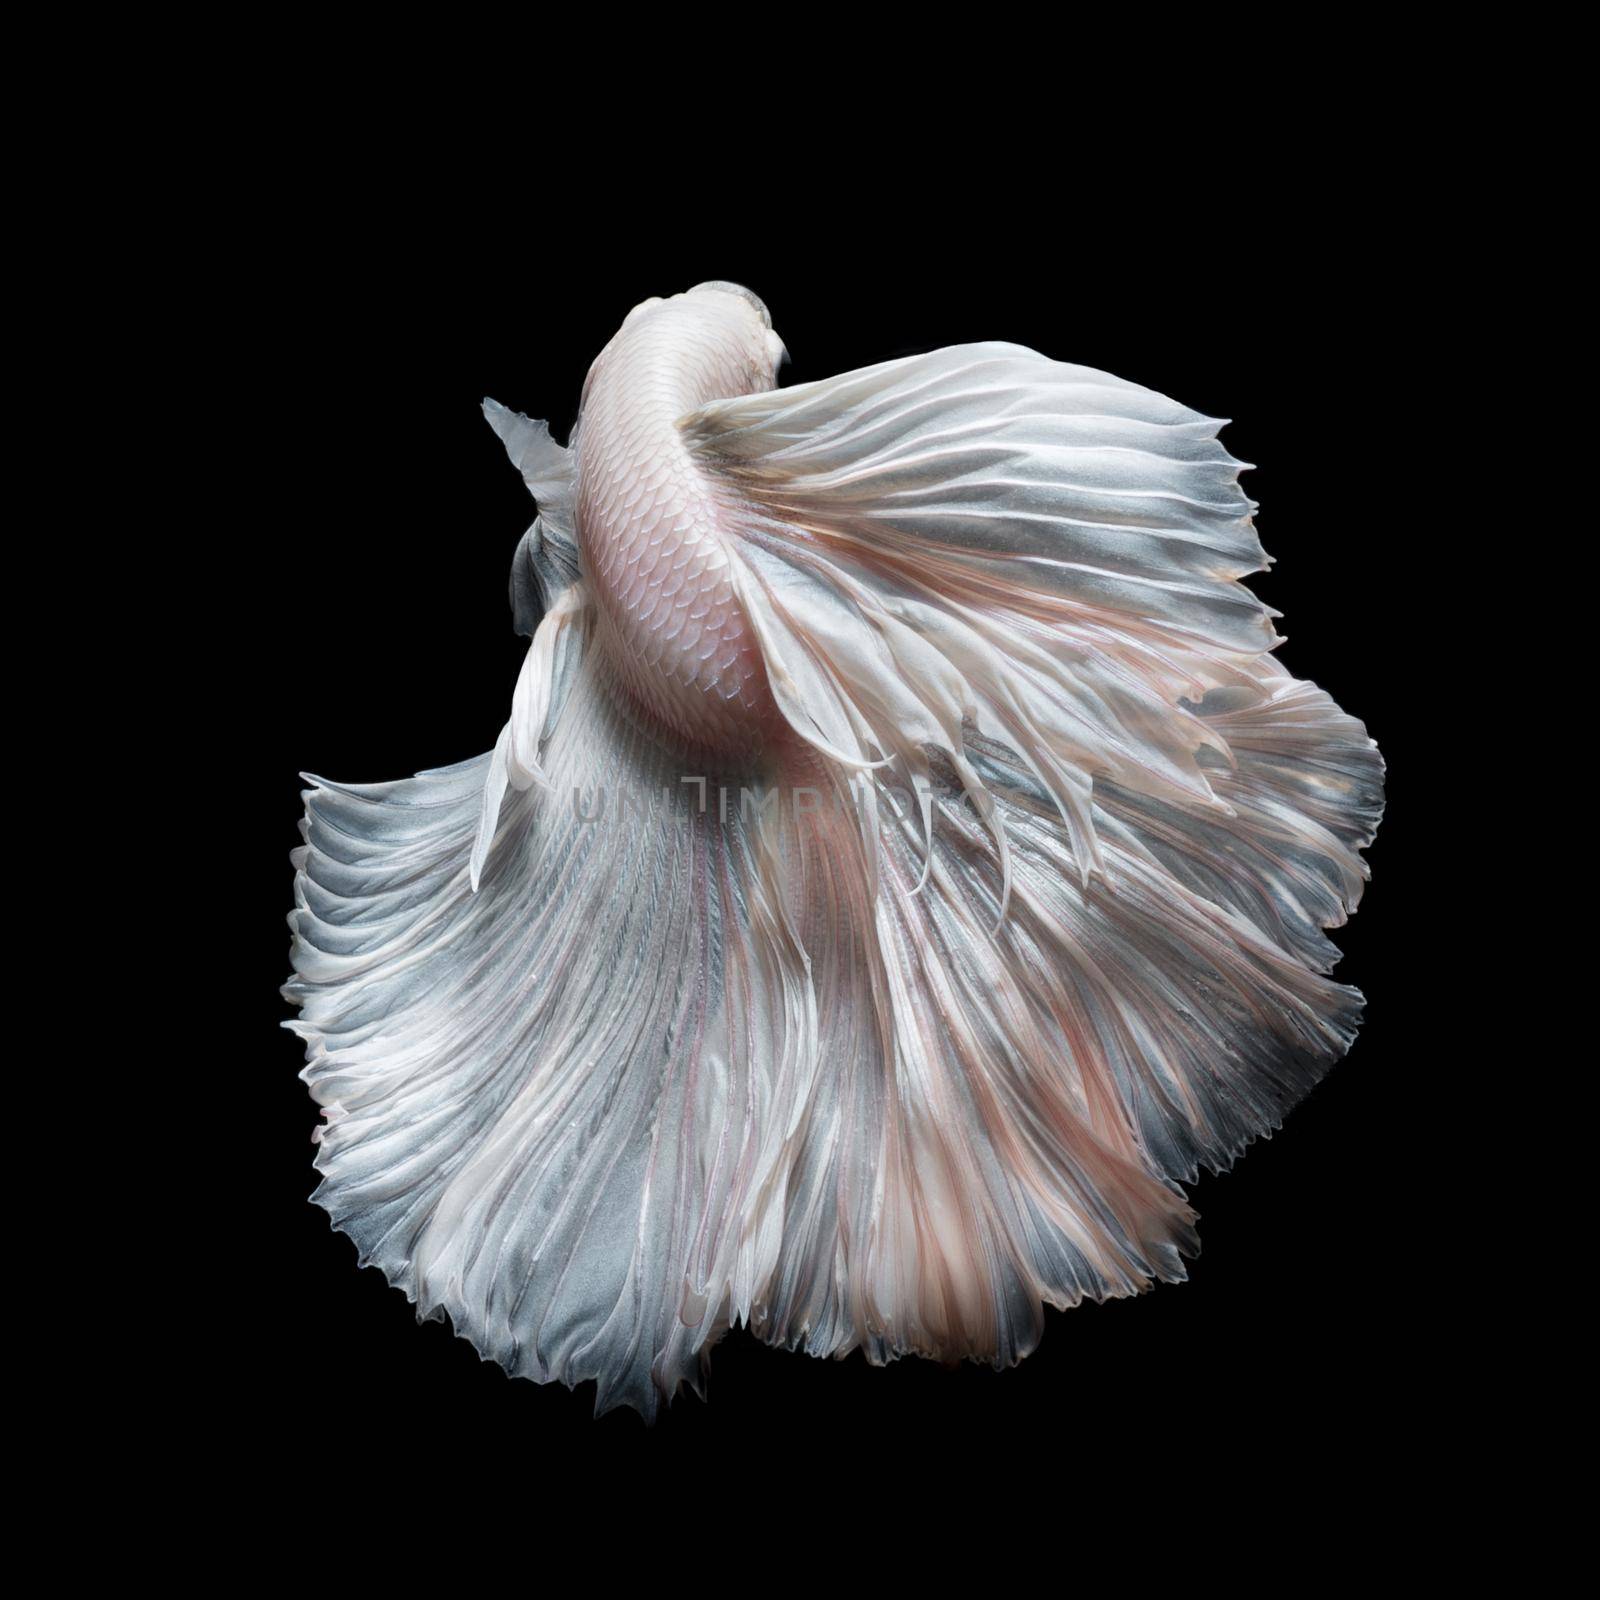 Betta fish,Siamese fighting fish in movement isolated on black background. by Nuamfolio